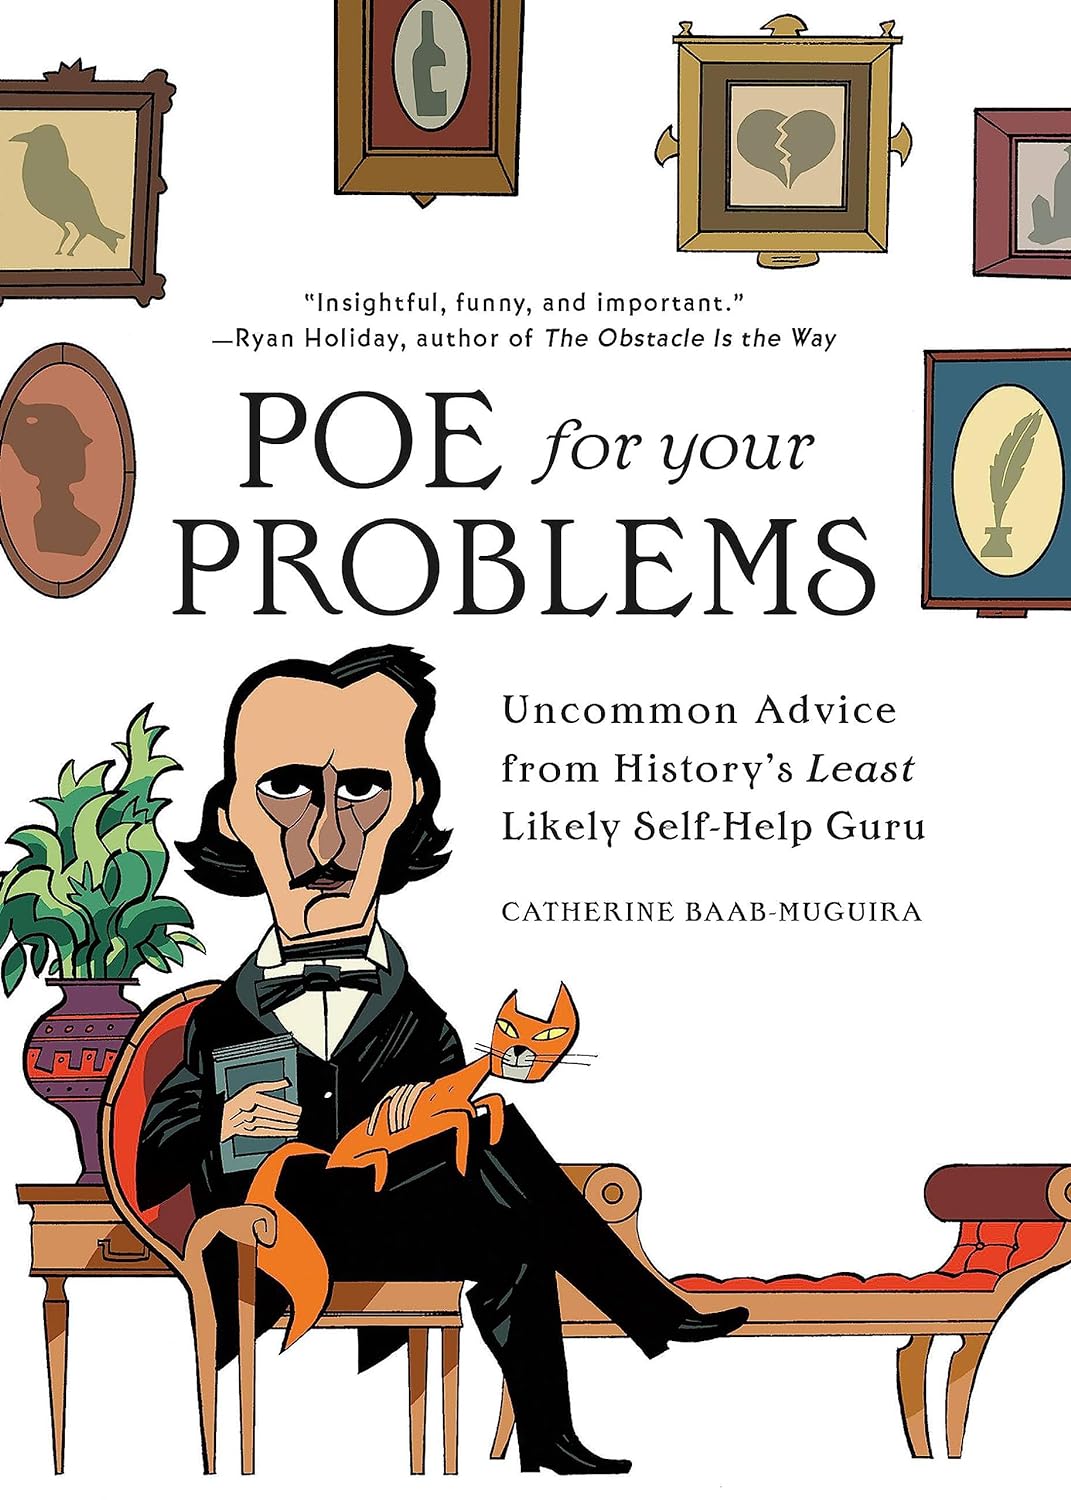 Catherine Baab-Muguira: Poe for Your Problems (2021, Running Press)